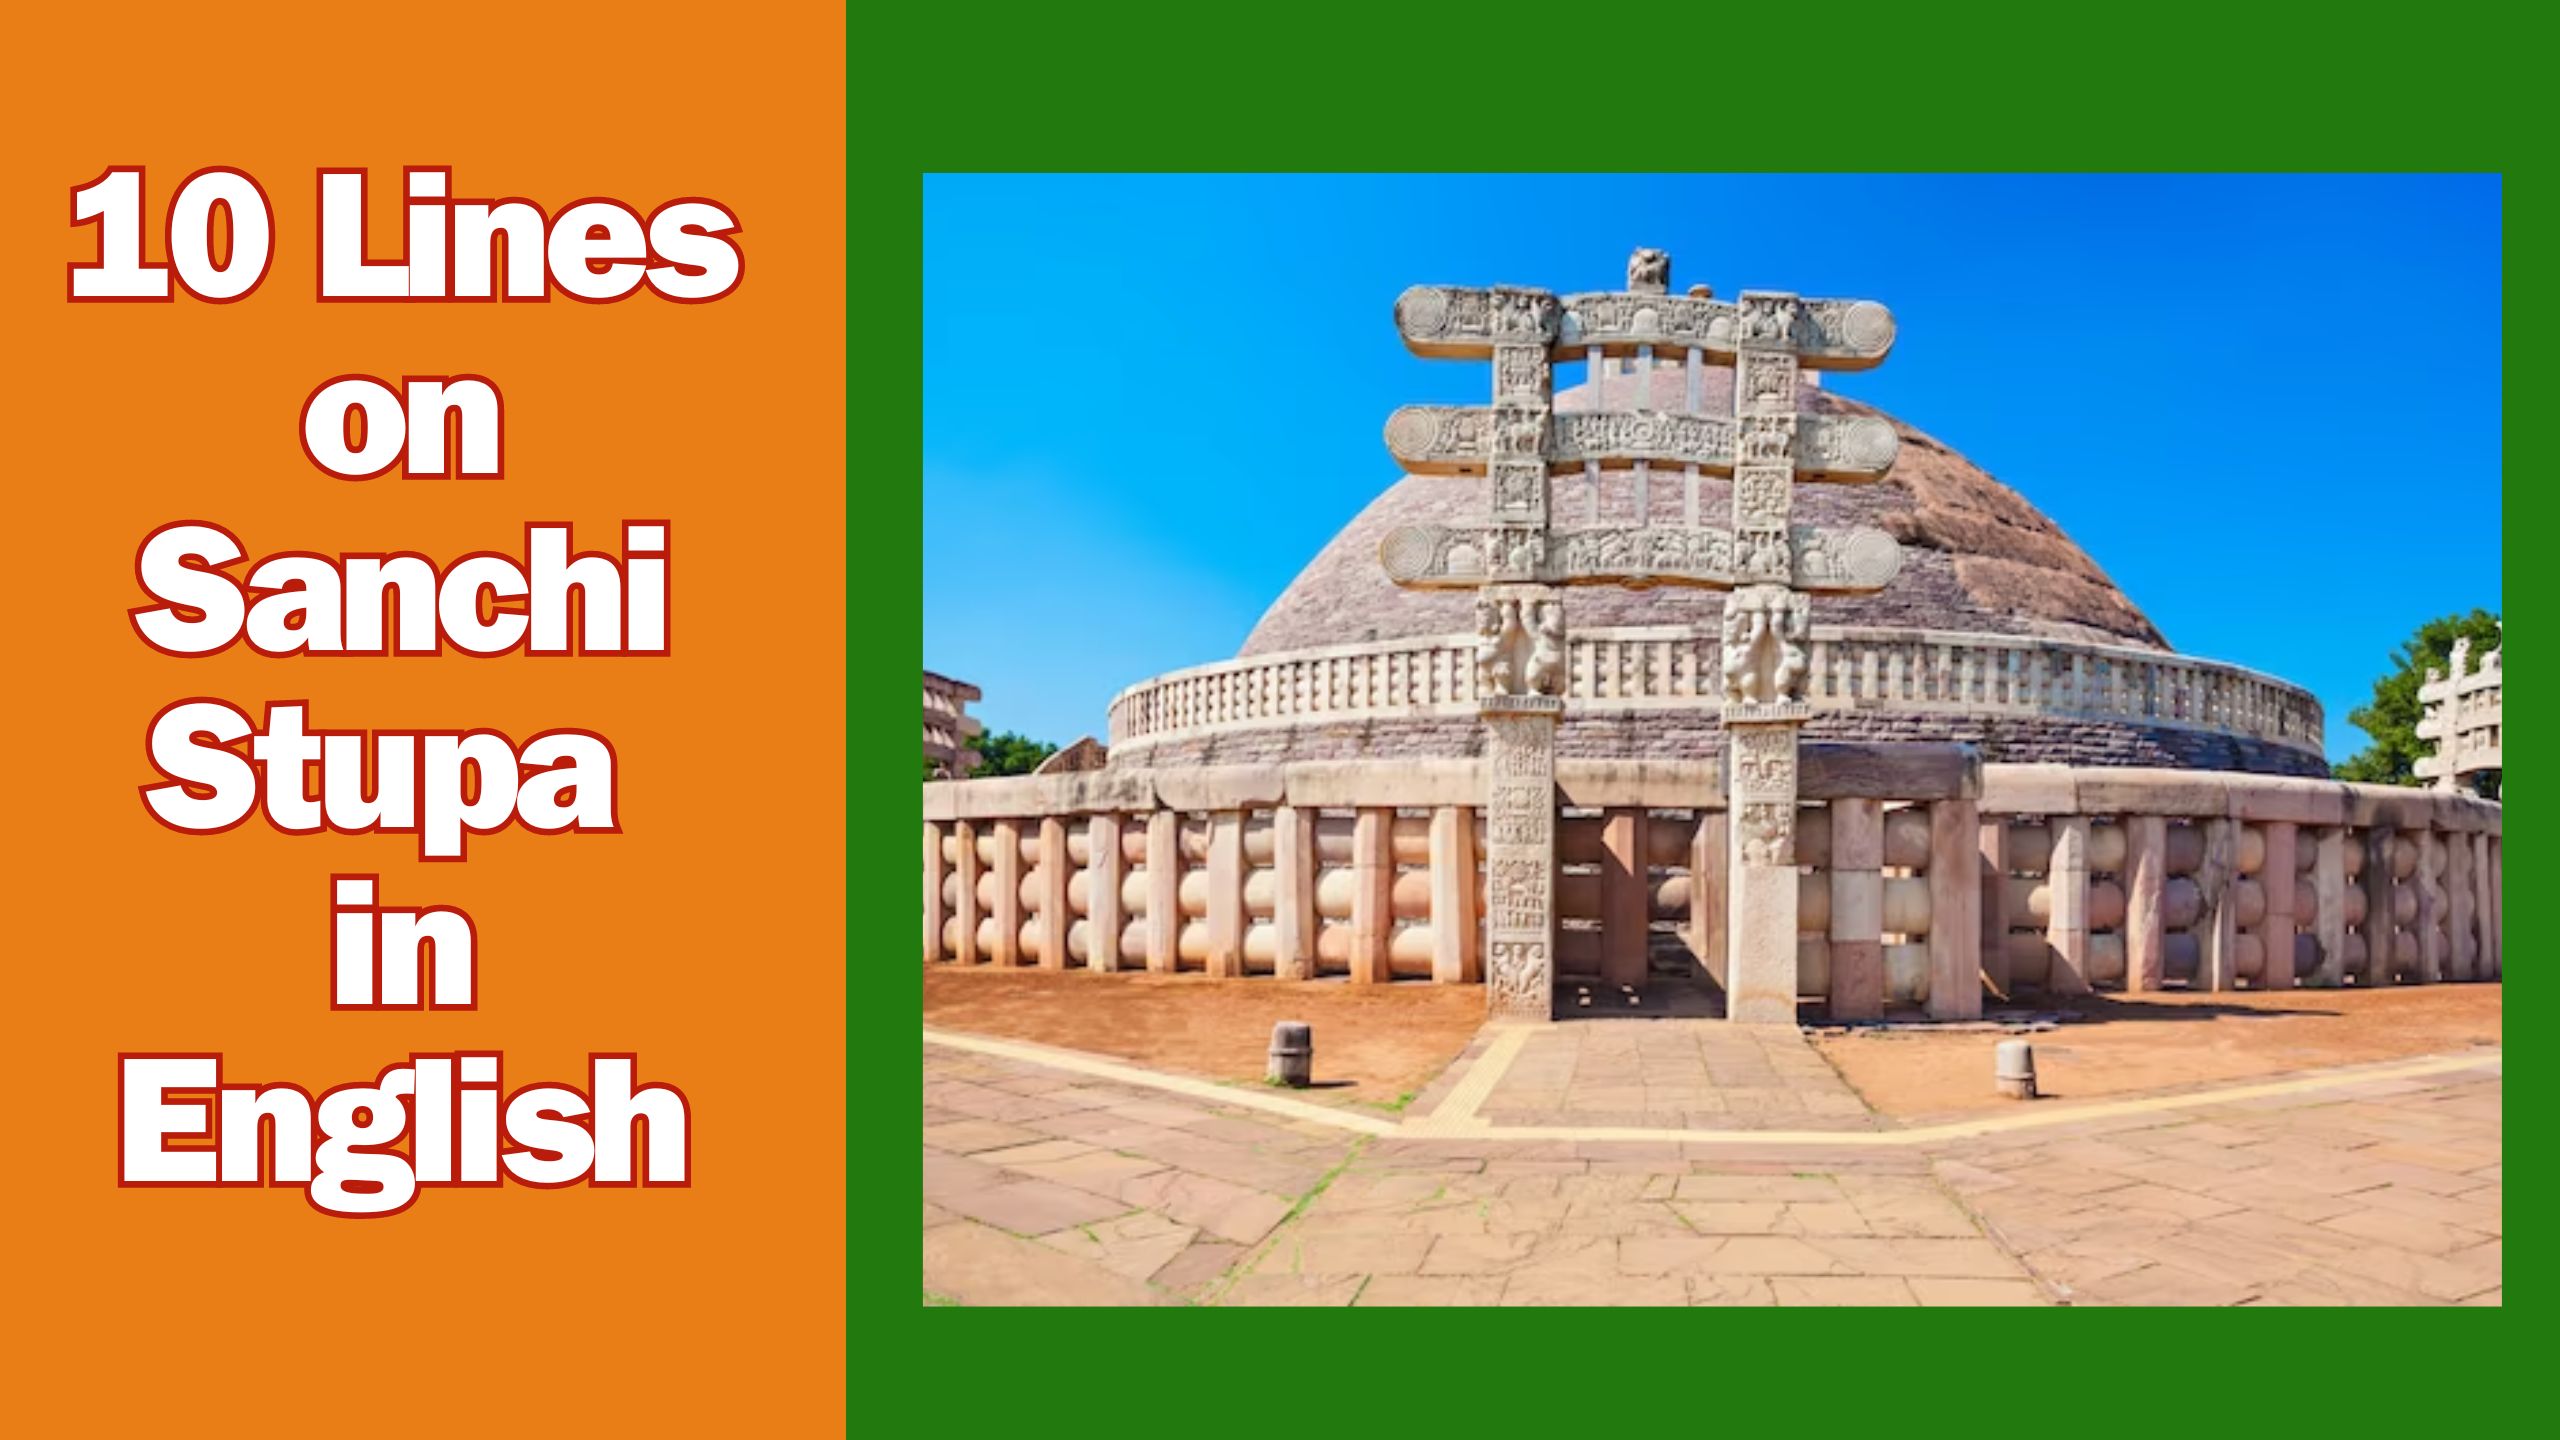 10 Lines on Sanchi Stupa in English